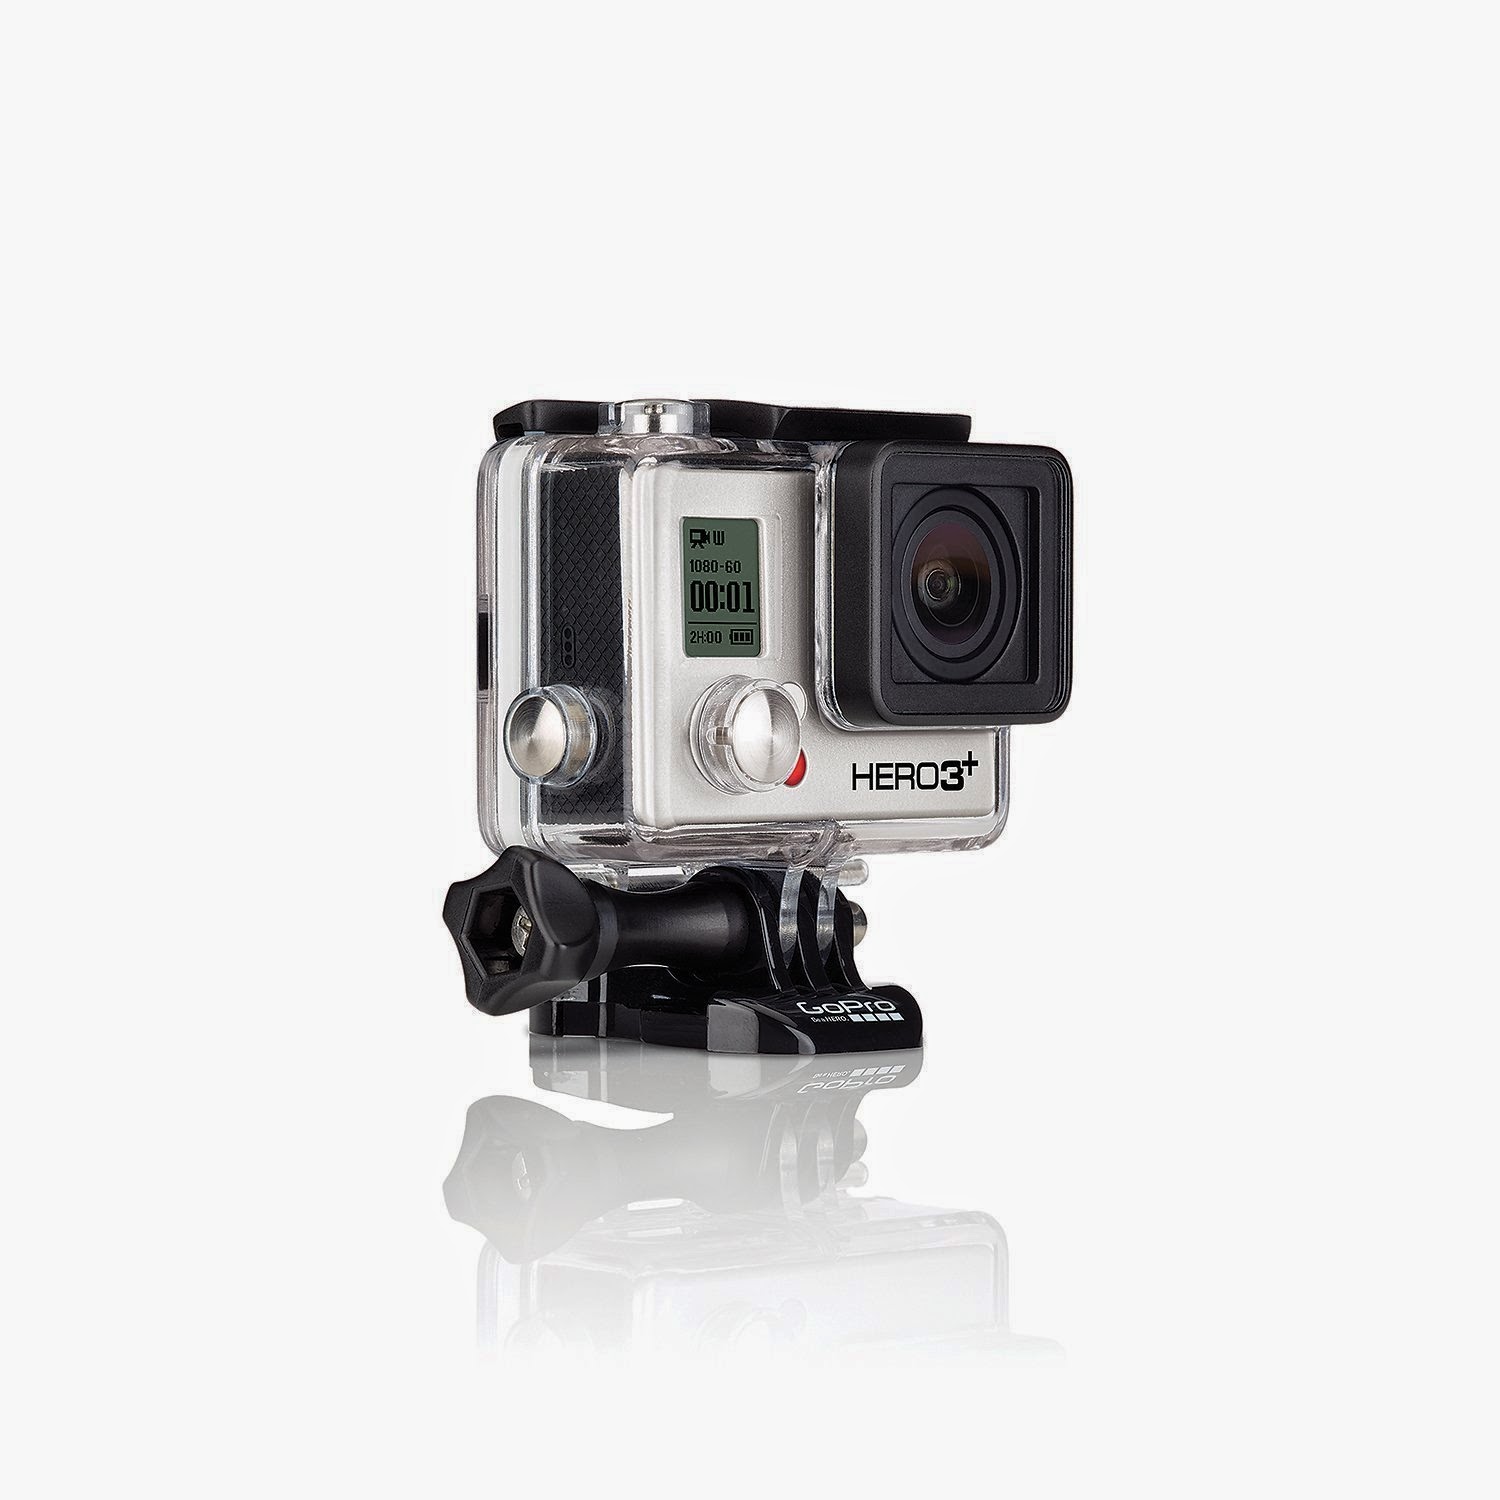 GoPro HERO3+ Black Edition Camera/Camcorder, review, compact, versatile, waterproof, wearable, mountable, captures fast action